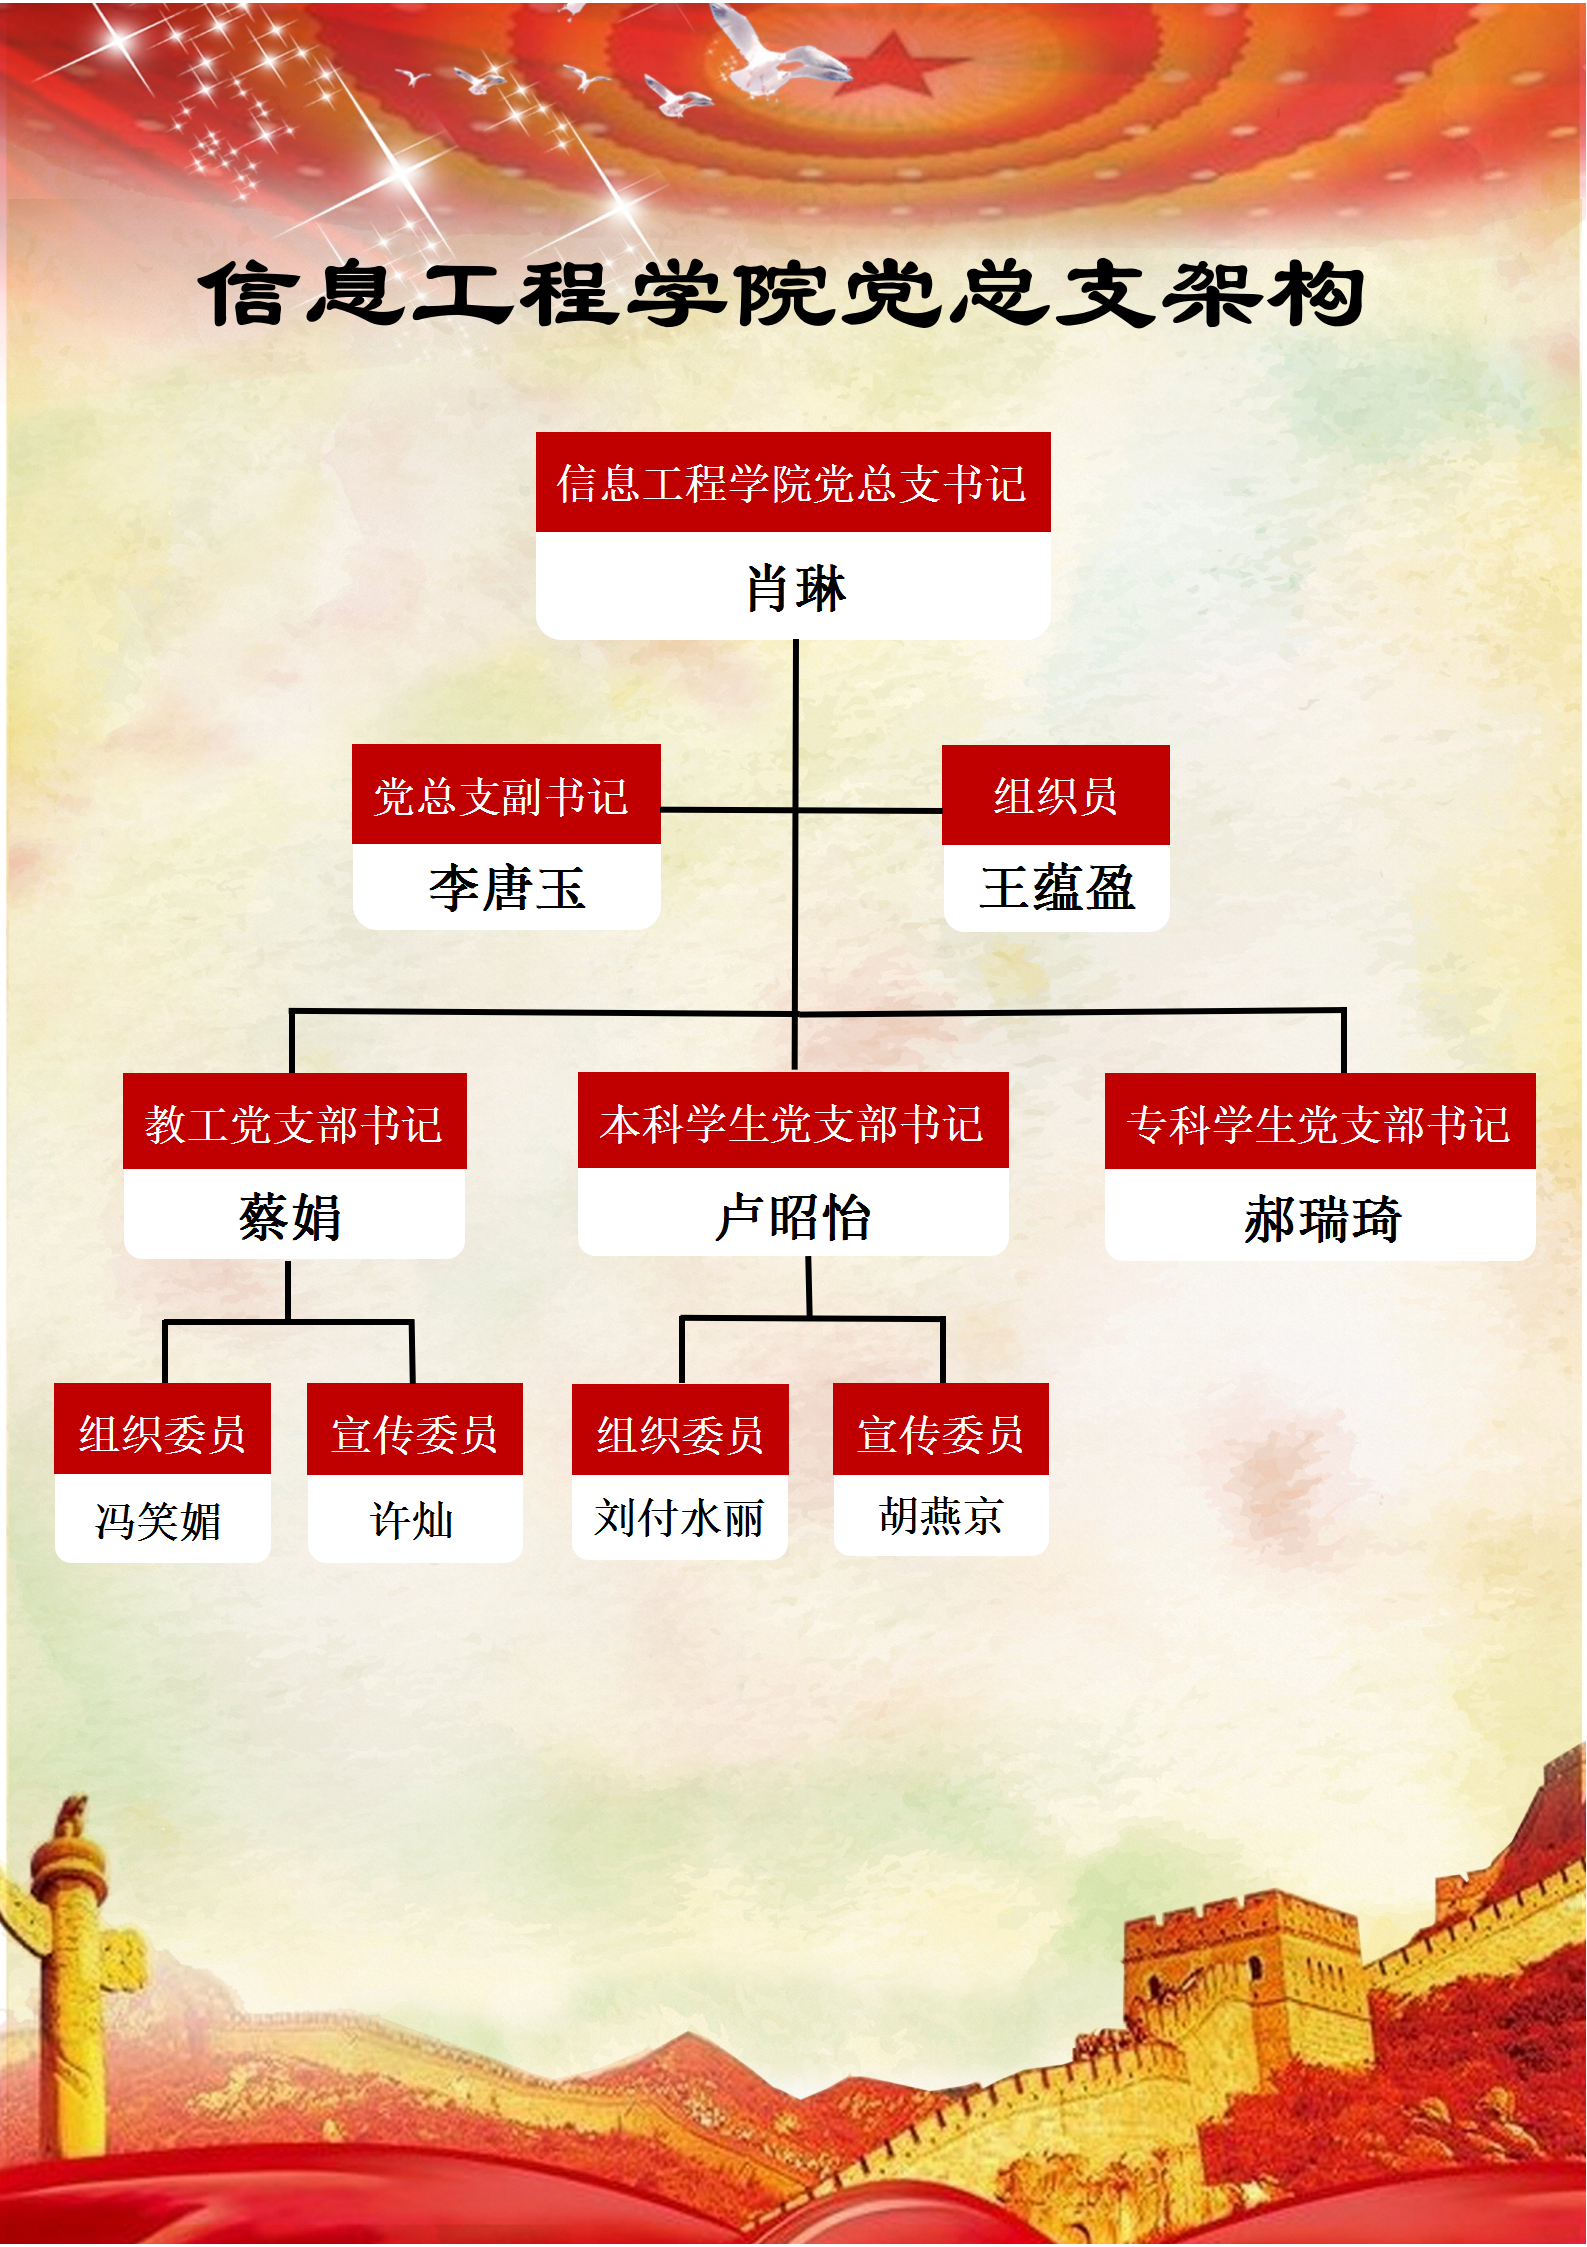 &#20449;&#24037;&#23398;&#38498;&#20826;&#24635;&#25903;&#26500;&#26550;&#22270;_01.png